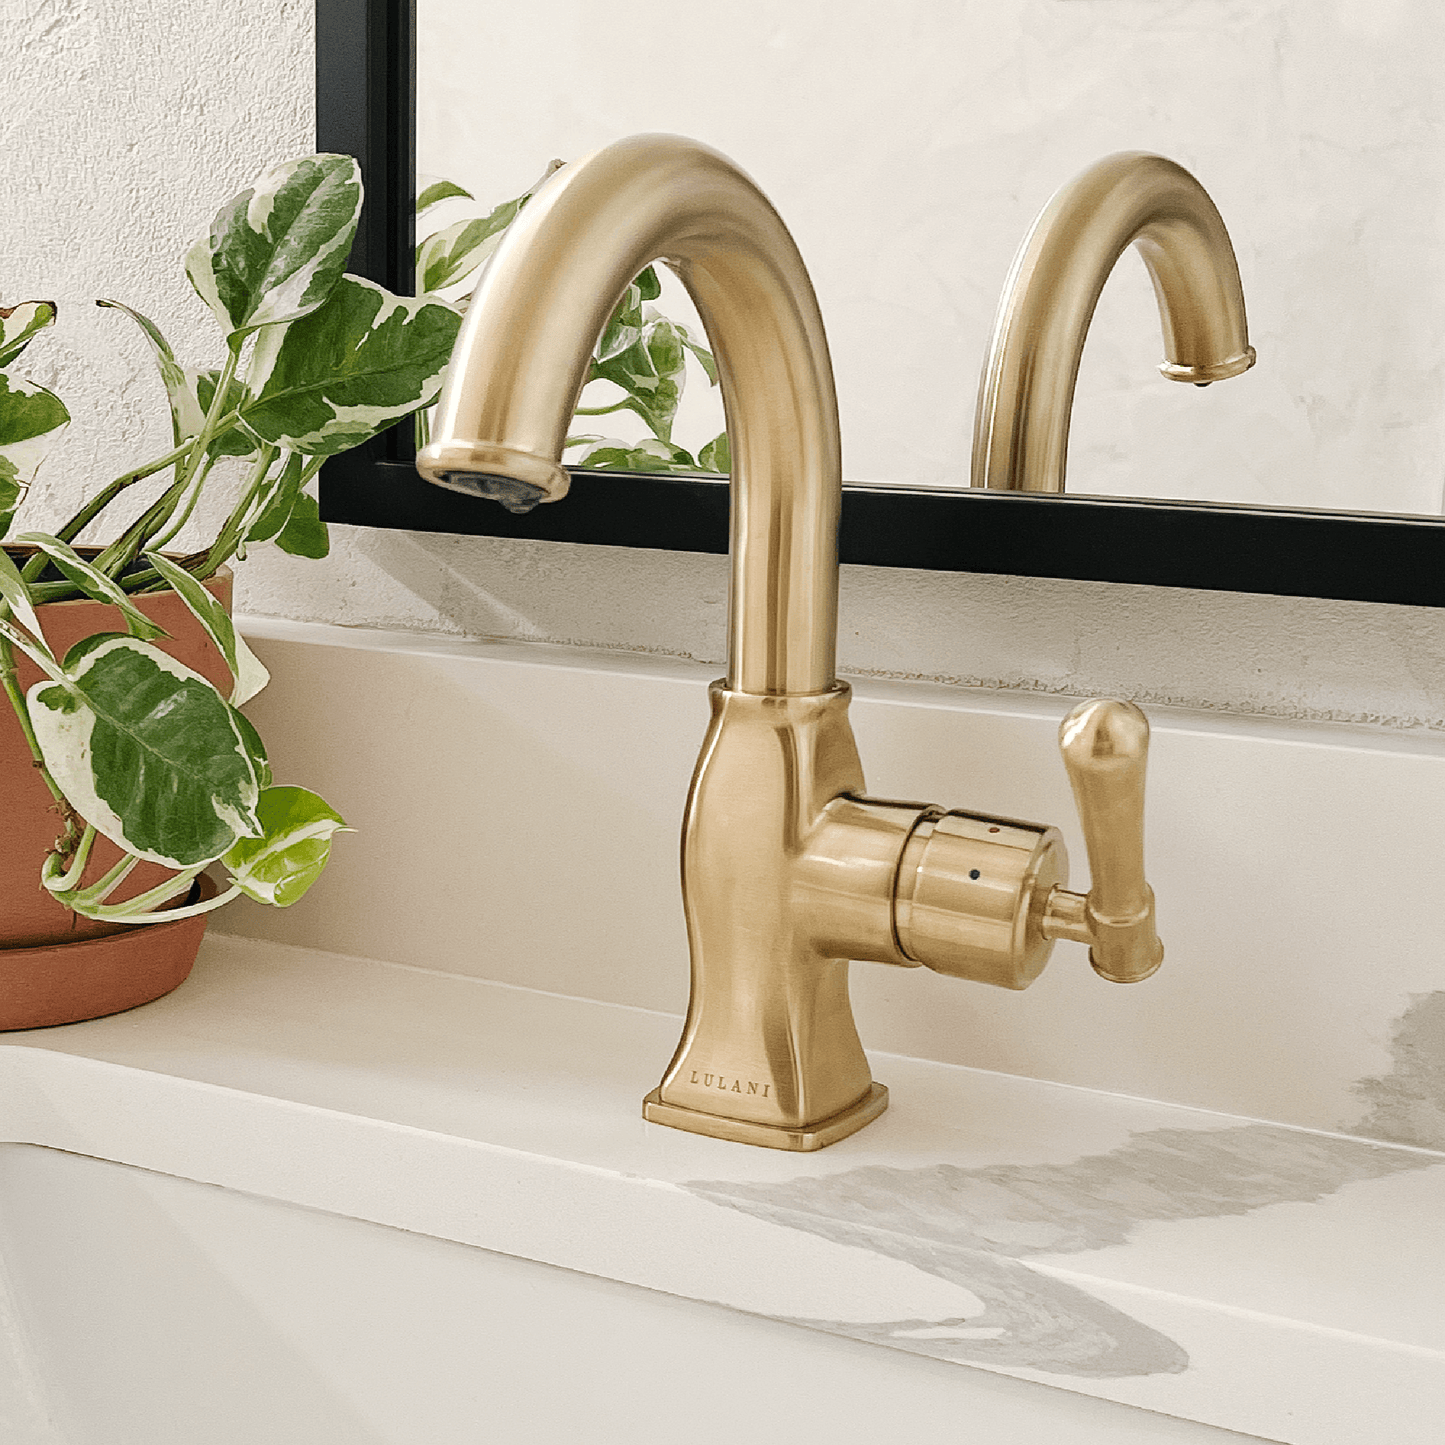 Lulani Aurora Champagne Gold 1.2 GPM Single Hole 1-Handle Brass Faucet With Drain Assembly